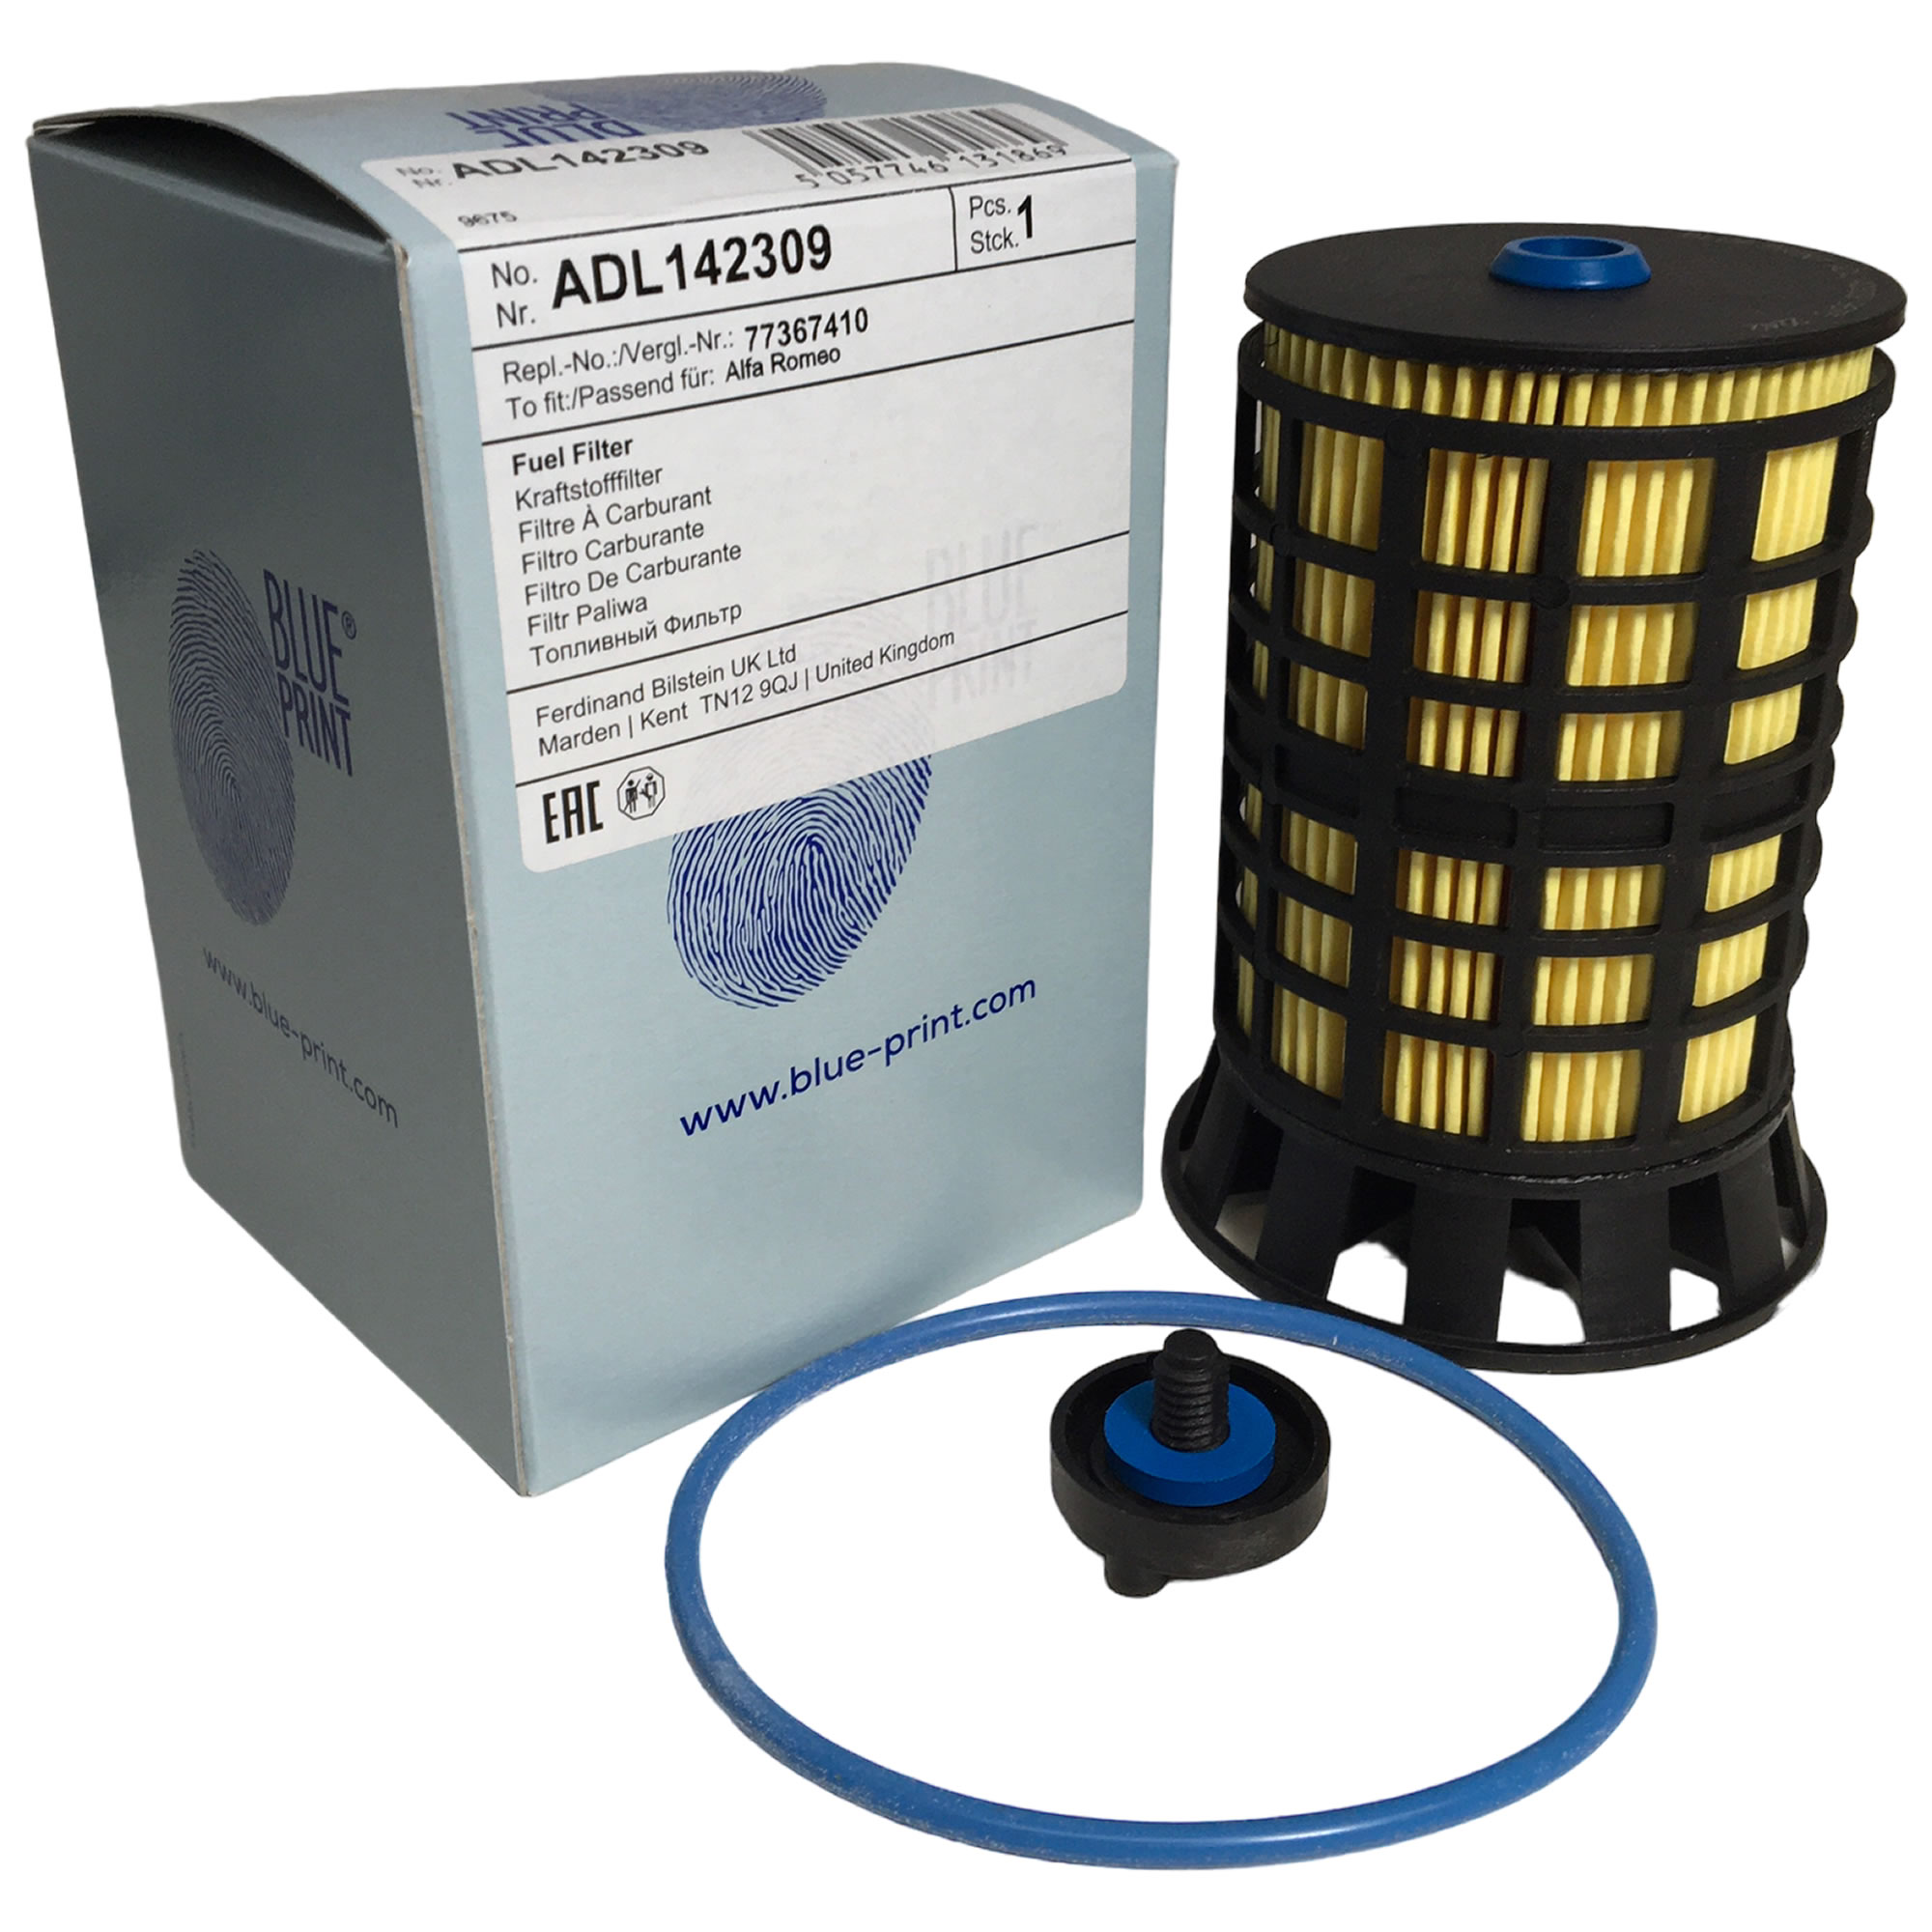 Blue Print Fuel Filter for Fiat Ducato Motorhomes and Vans ADL142309